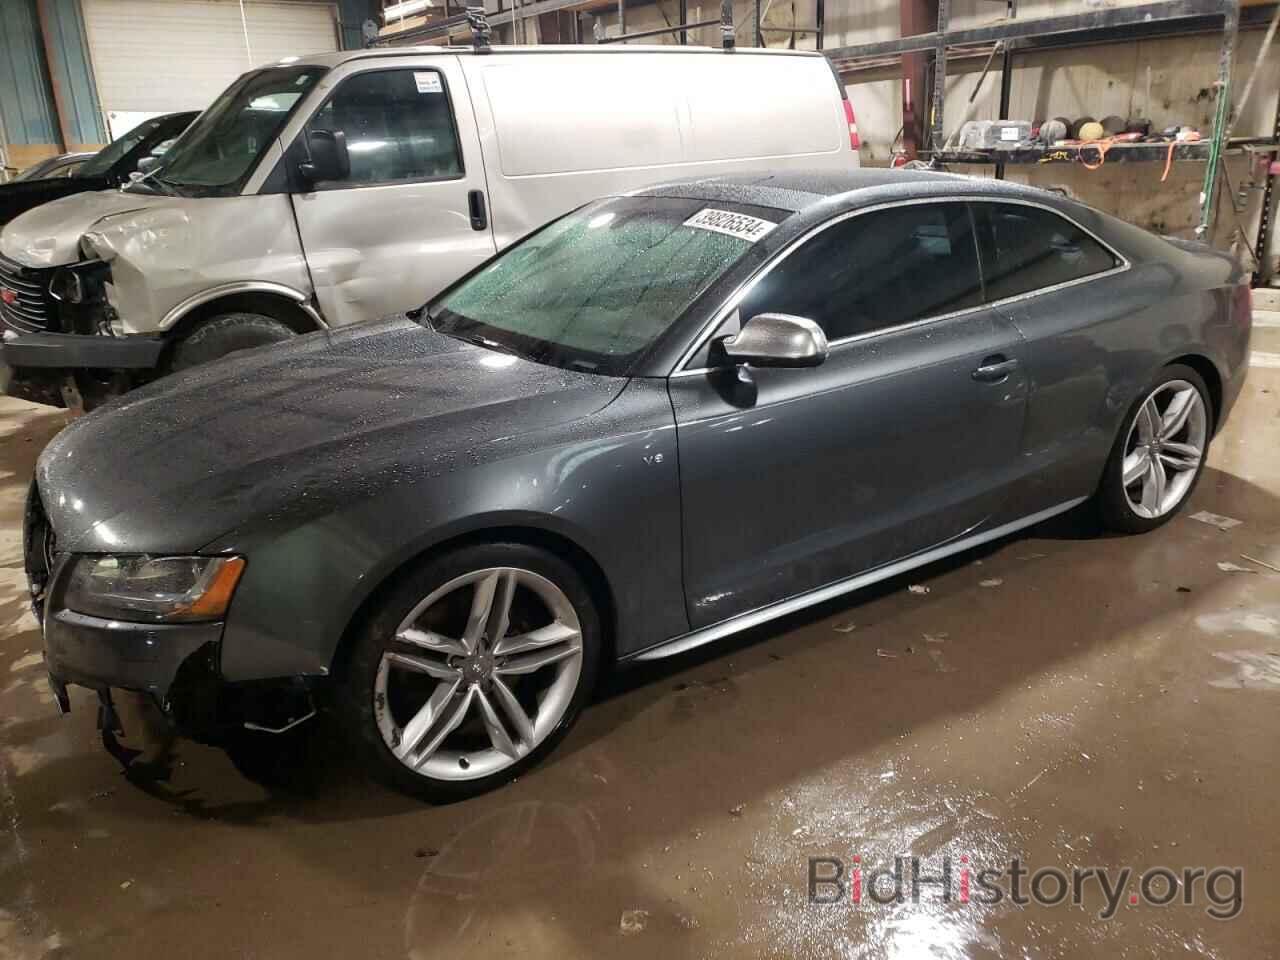 Photo WAUVVAFR0AA009793 - AUDI S5/RS5 2010